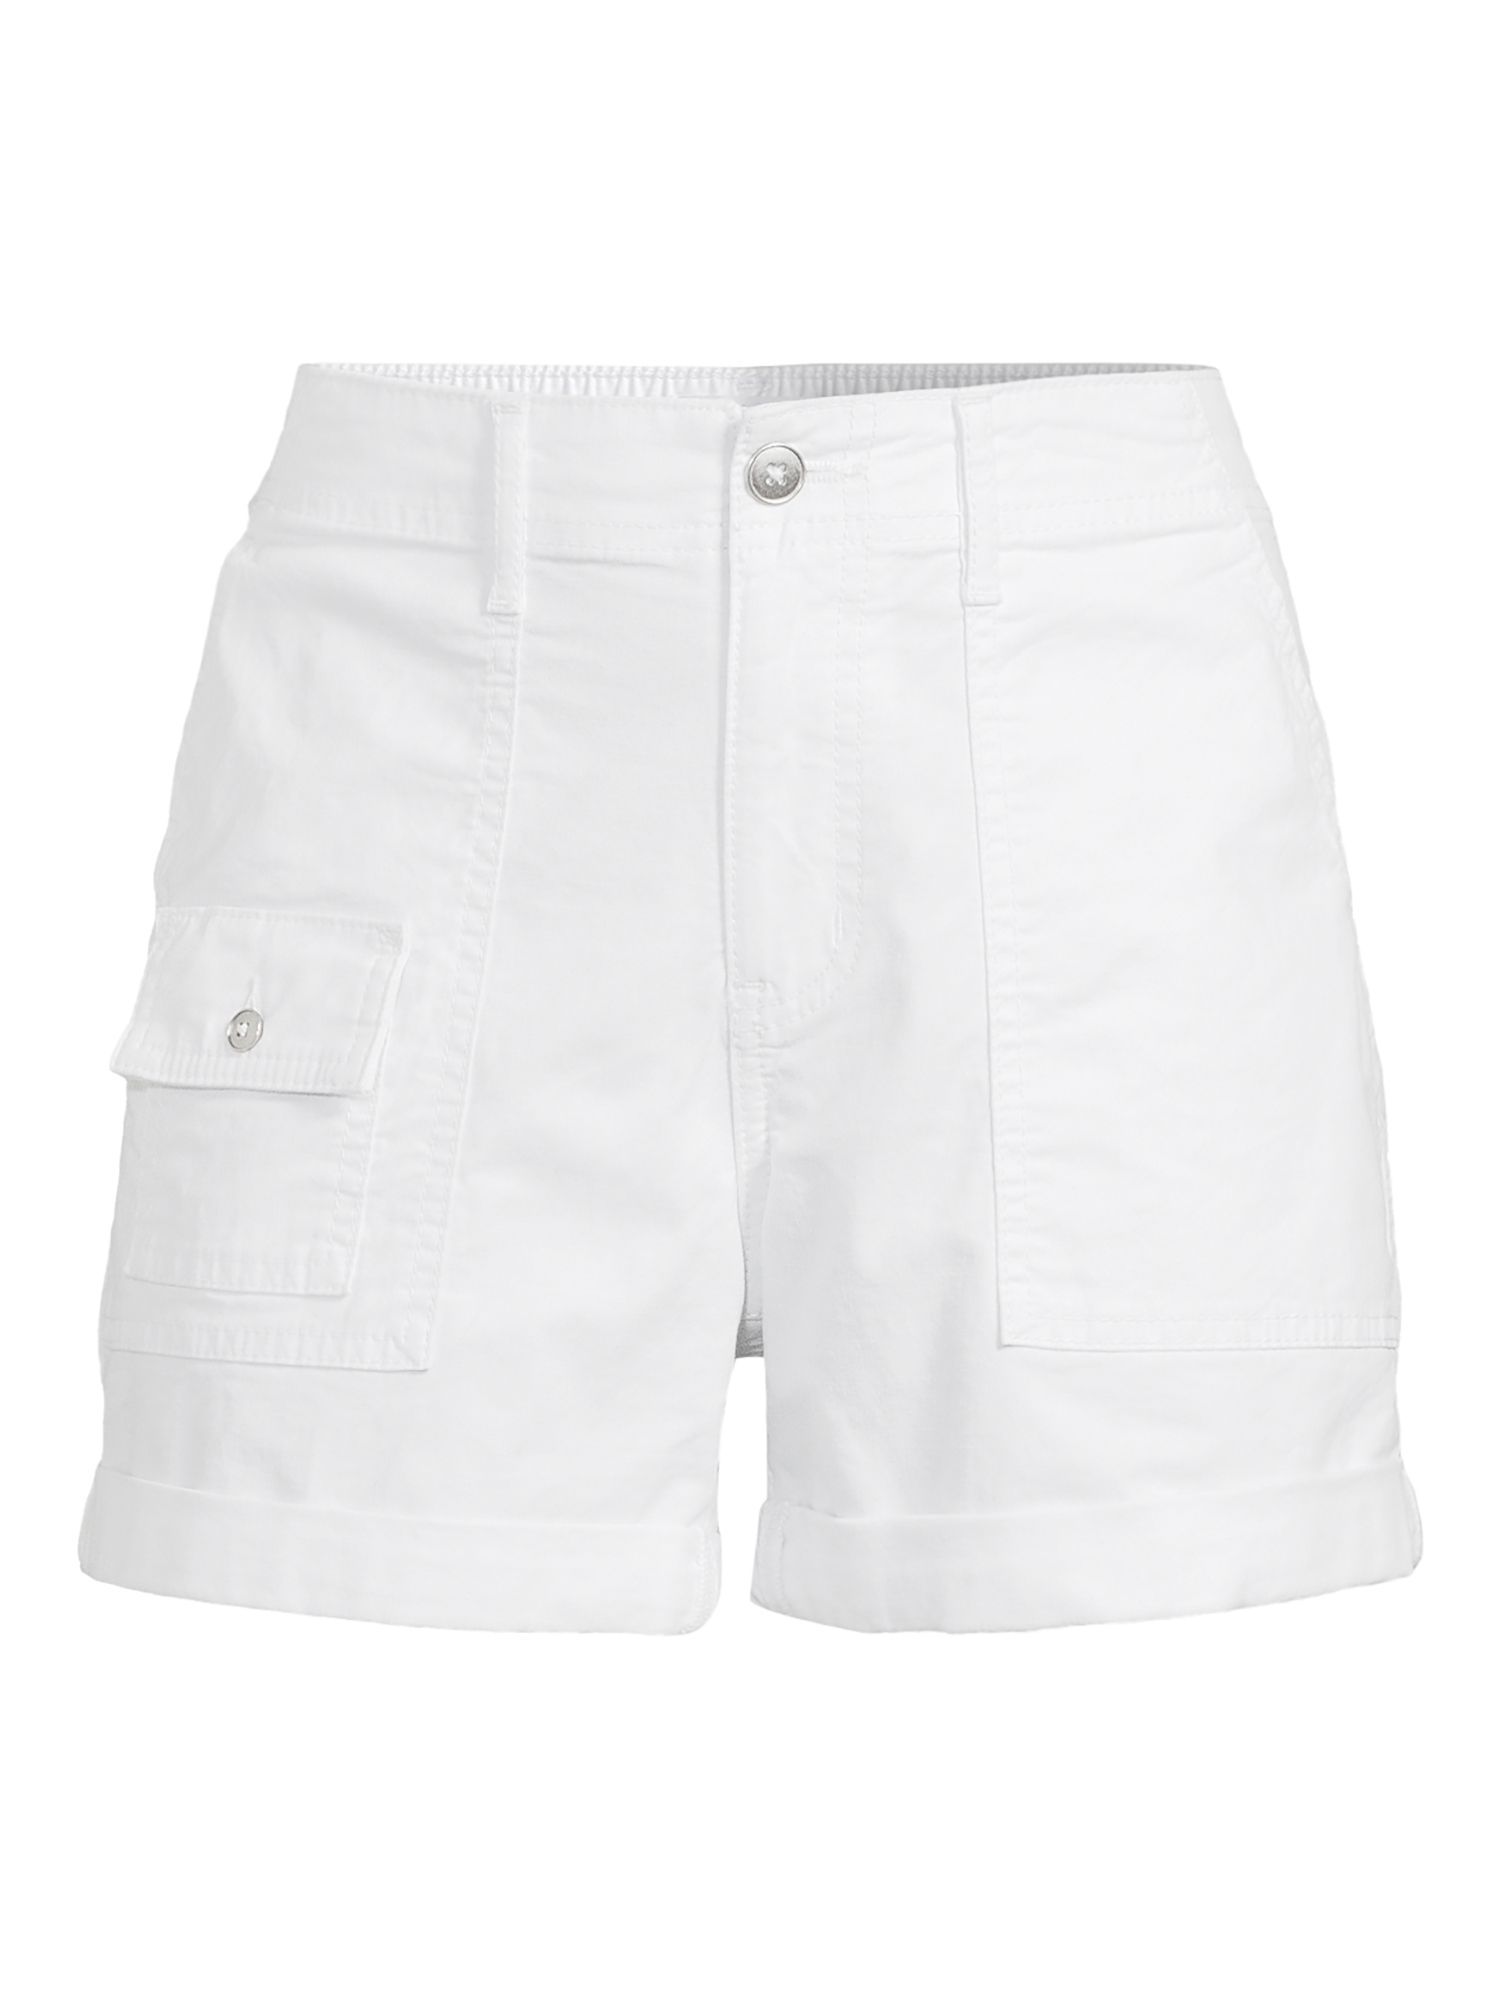 Time and Tru Women's and Women's Plus Utility Cuff Shorts, 4" Inseam, Sizes 2-20 - image 5 of 6